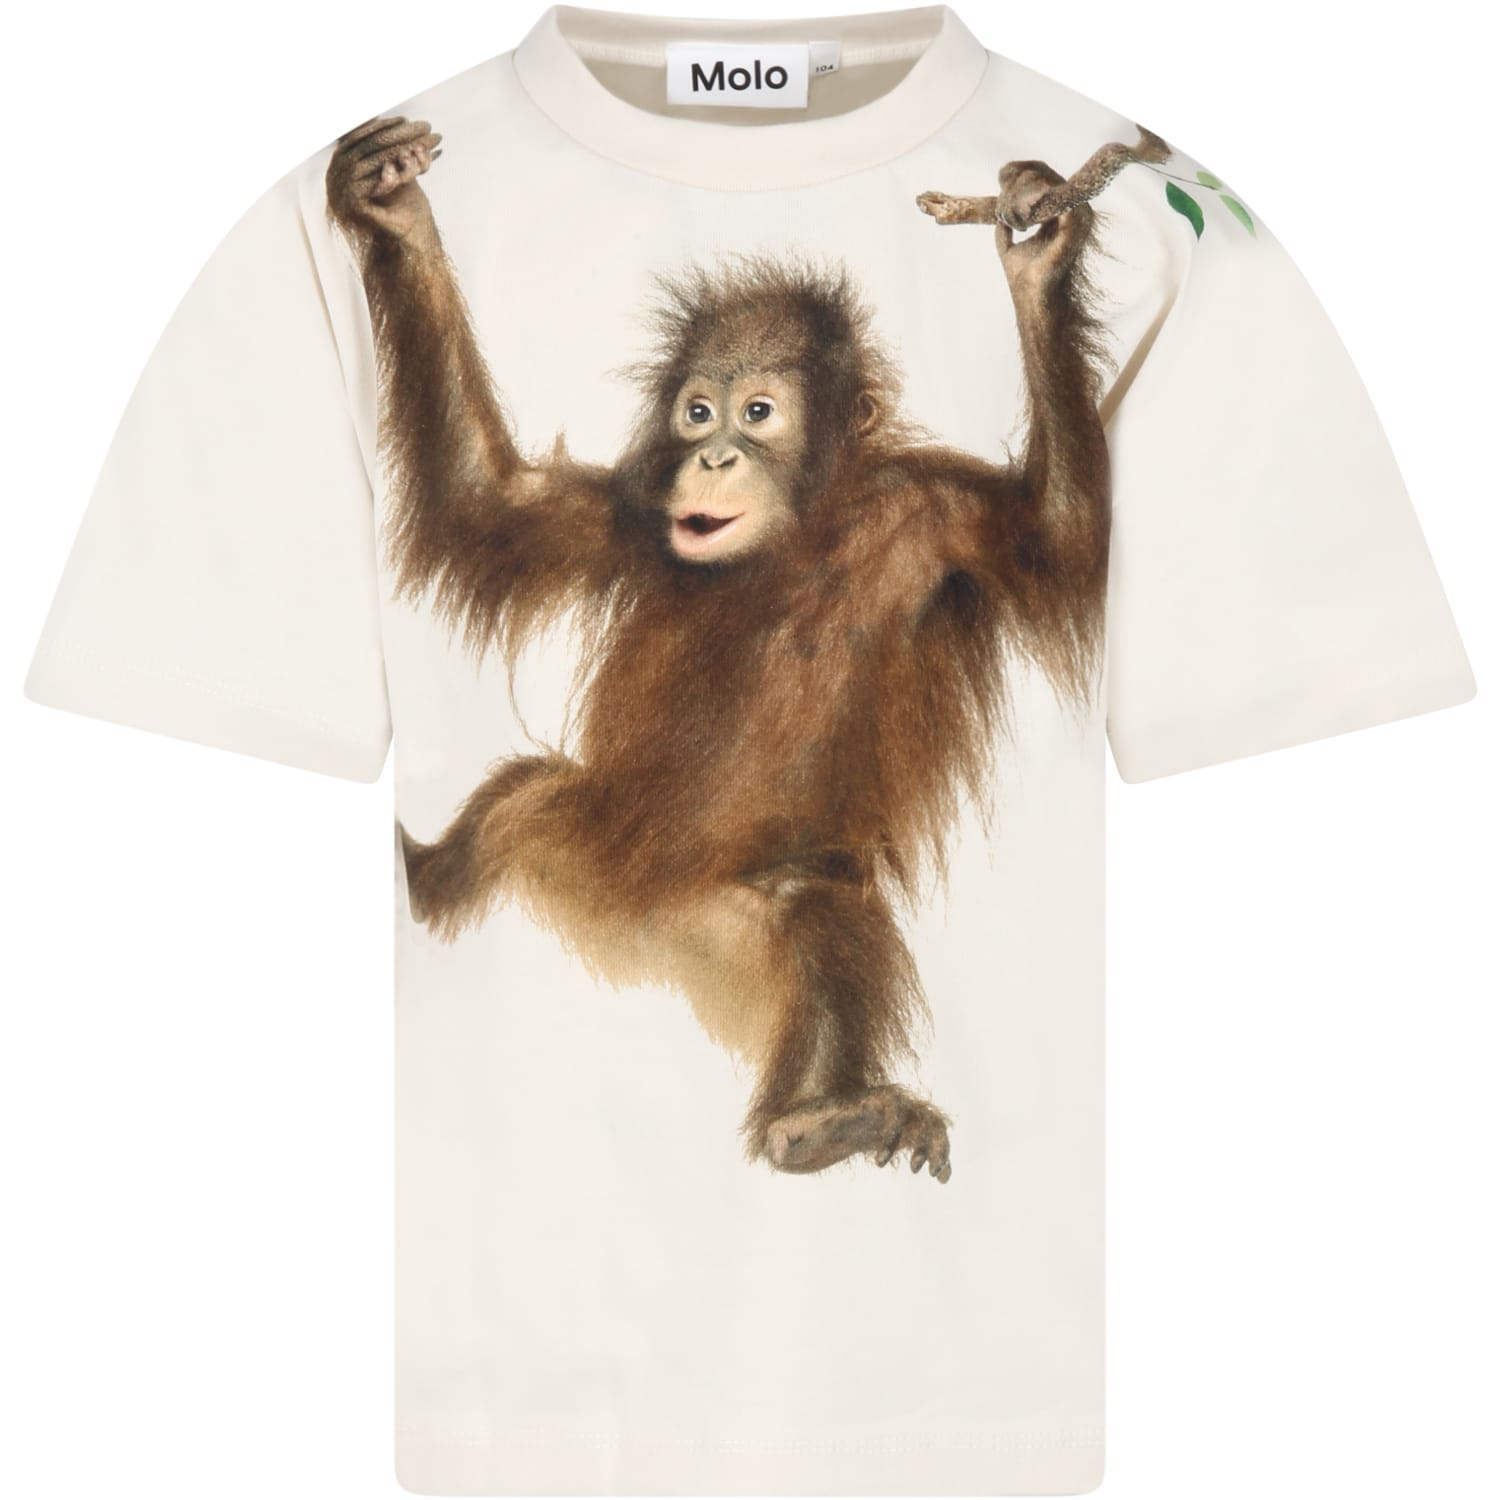 Molo Beige T-shirt For Kids With Monkey